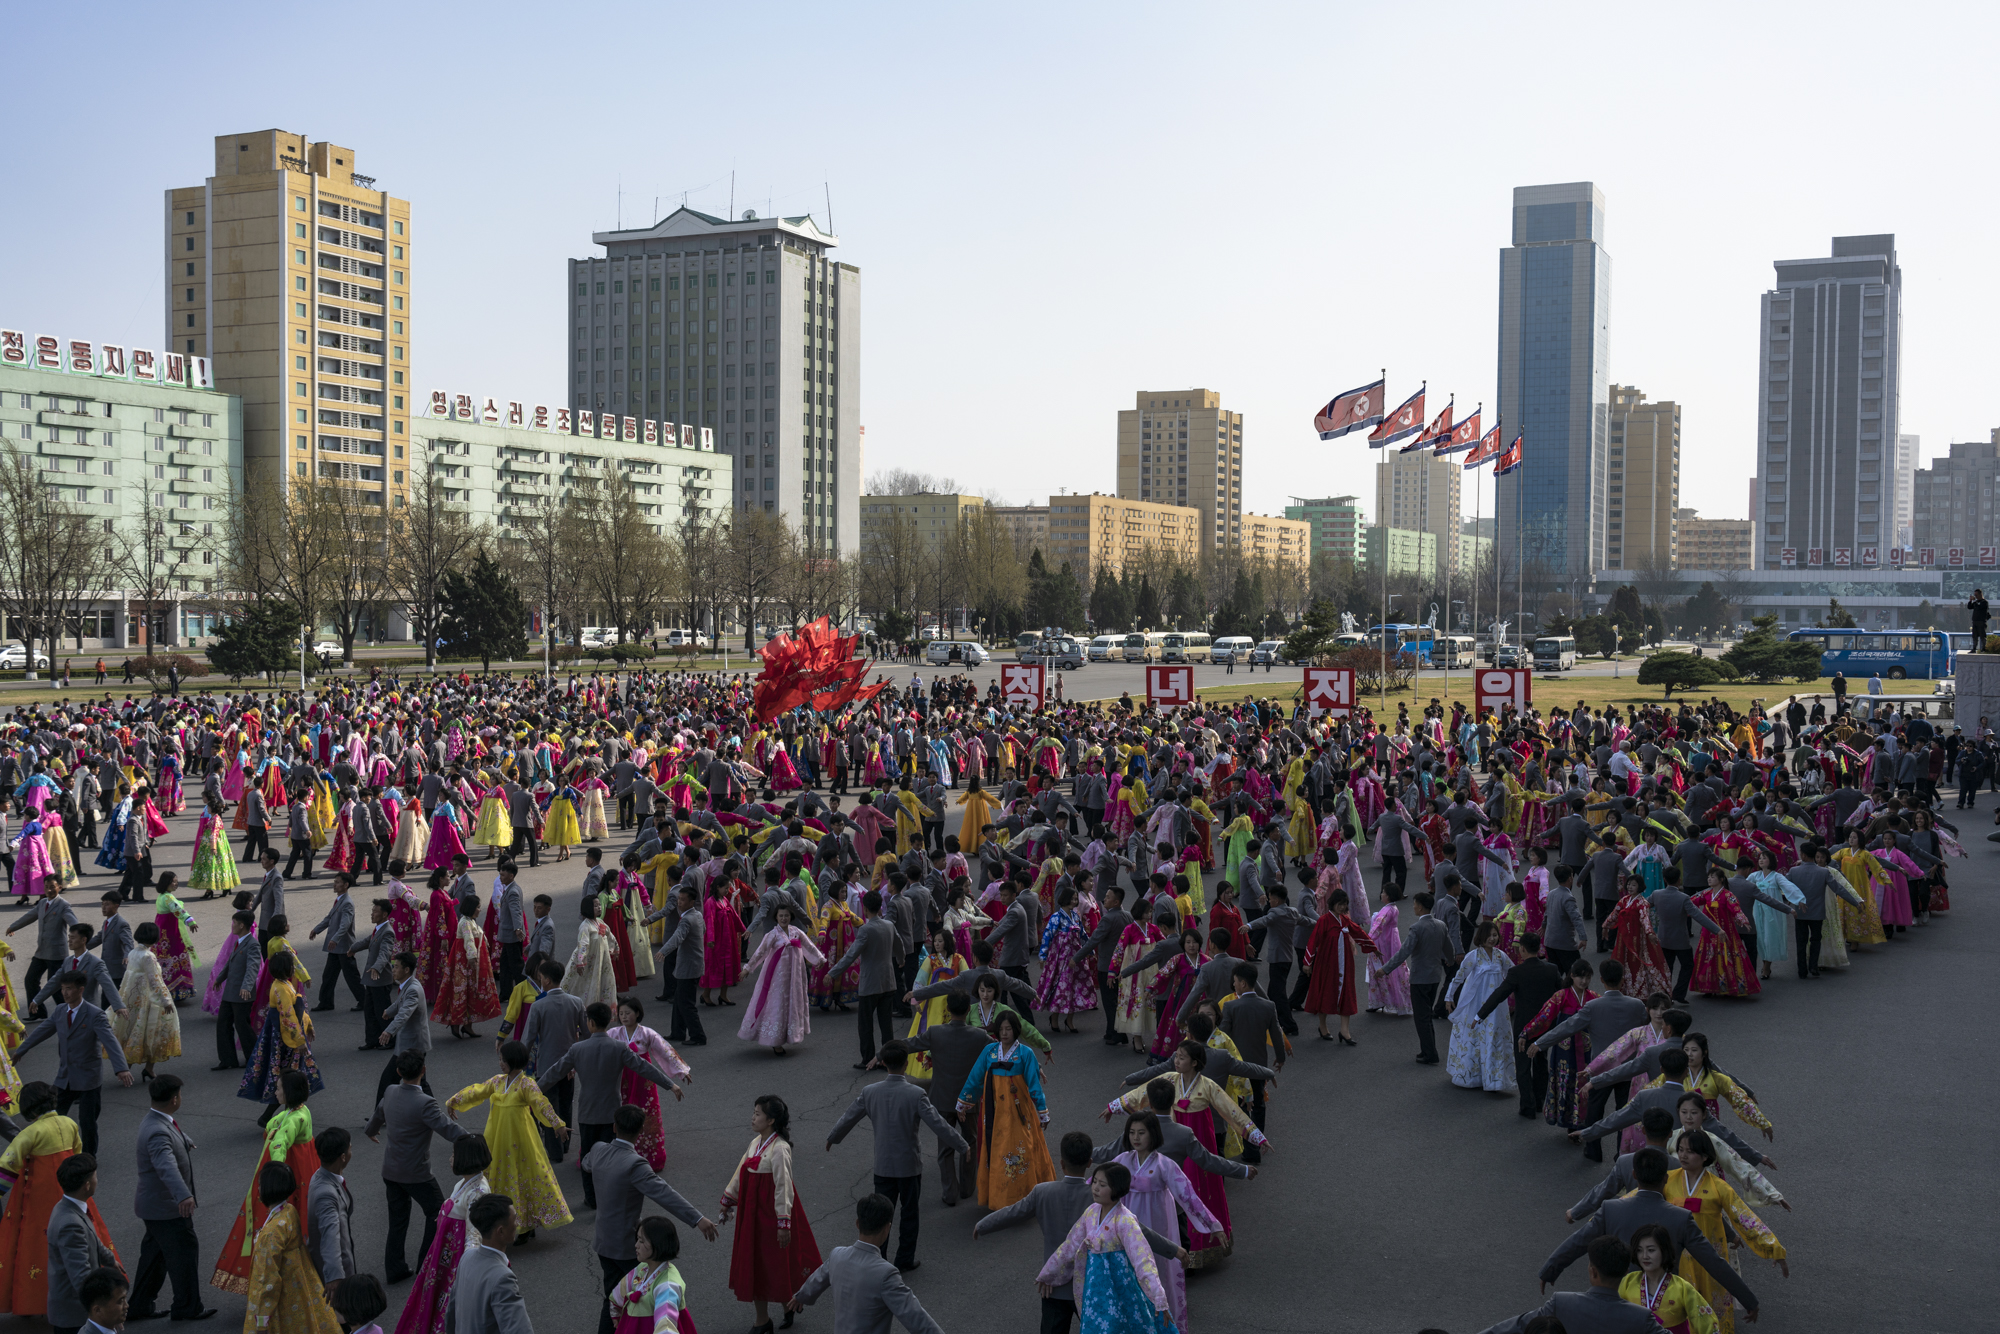  North Korean students perform at a Mass Dance in honour of the former Great Leader Kim Il Sung on his birthday anniversary in Pyongyang on April 15.  Mass Dances are large choreographed dances, accompanied by revolutionary and folk music, taking pla